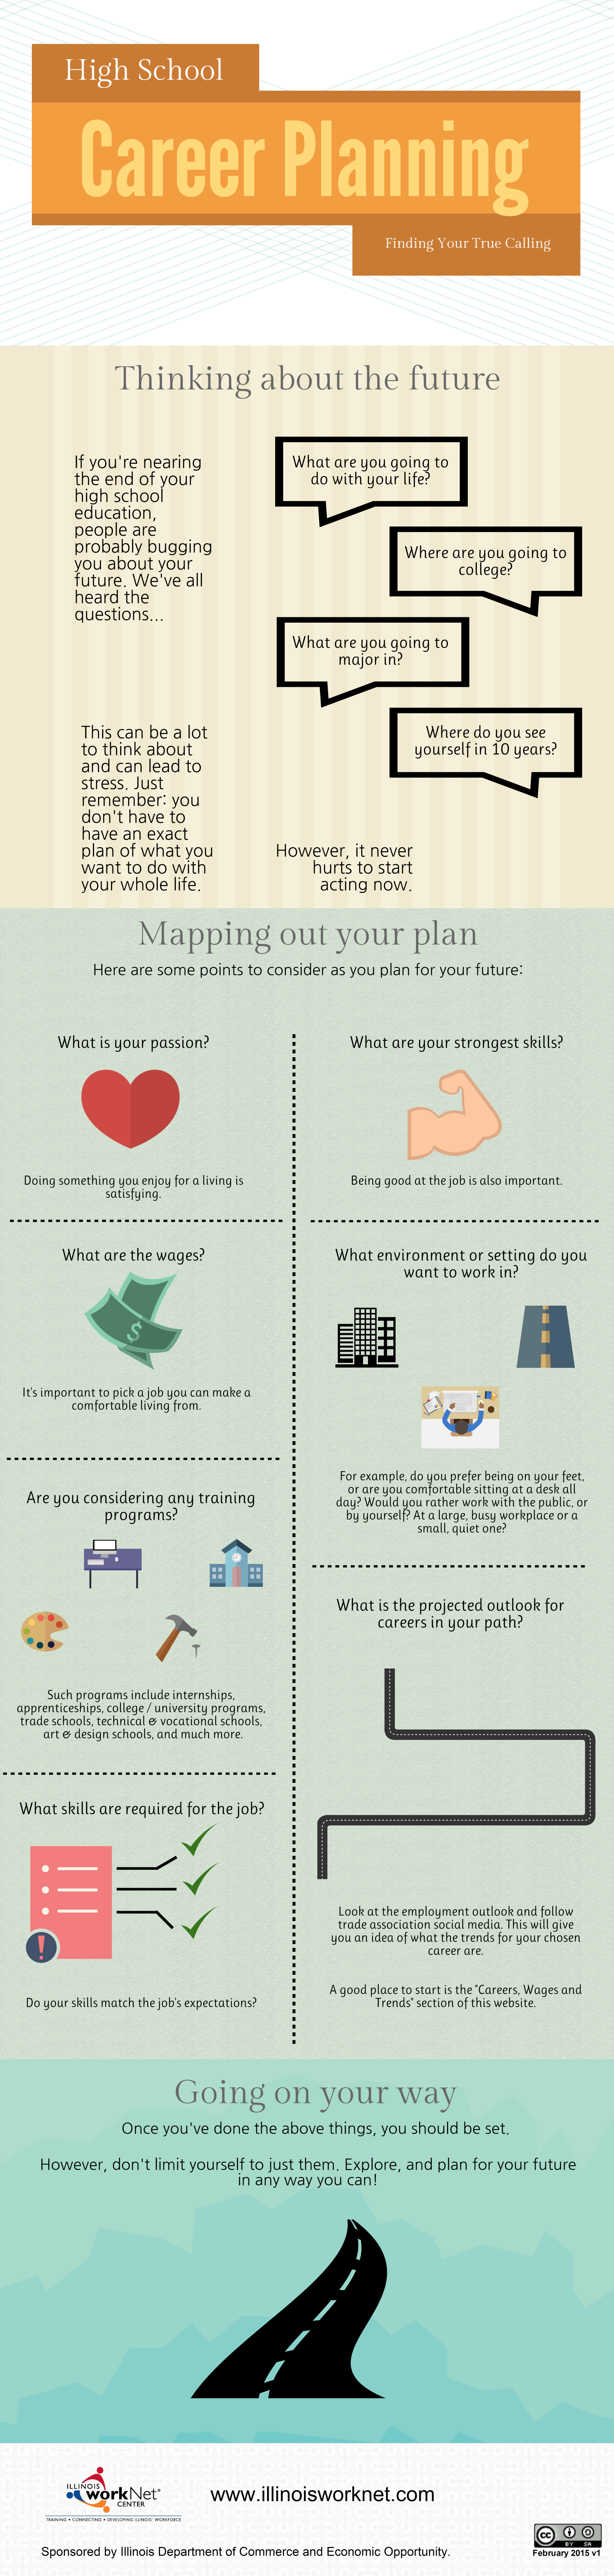 Infographic for Career Planning in High School